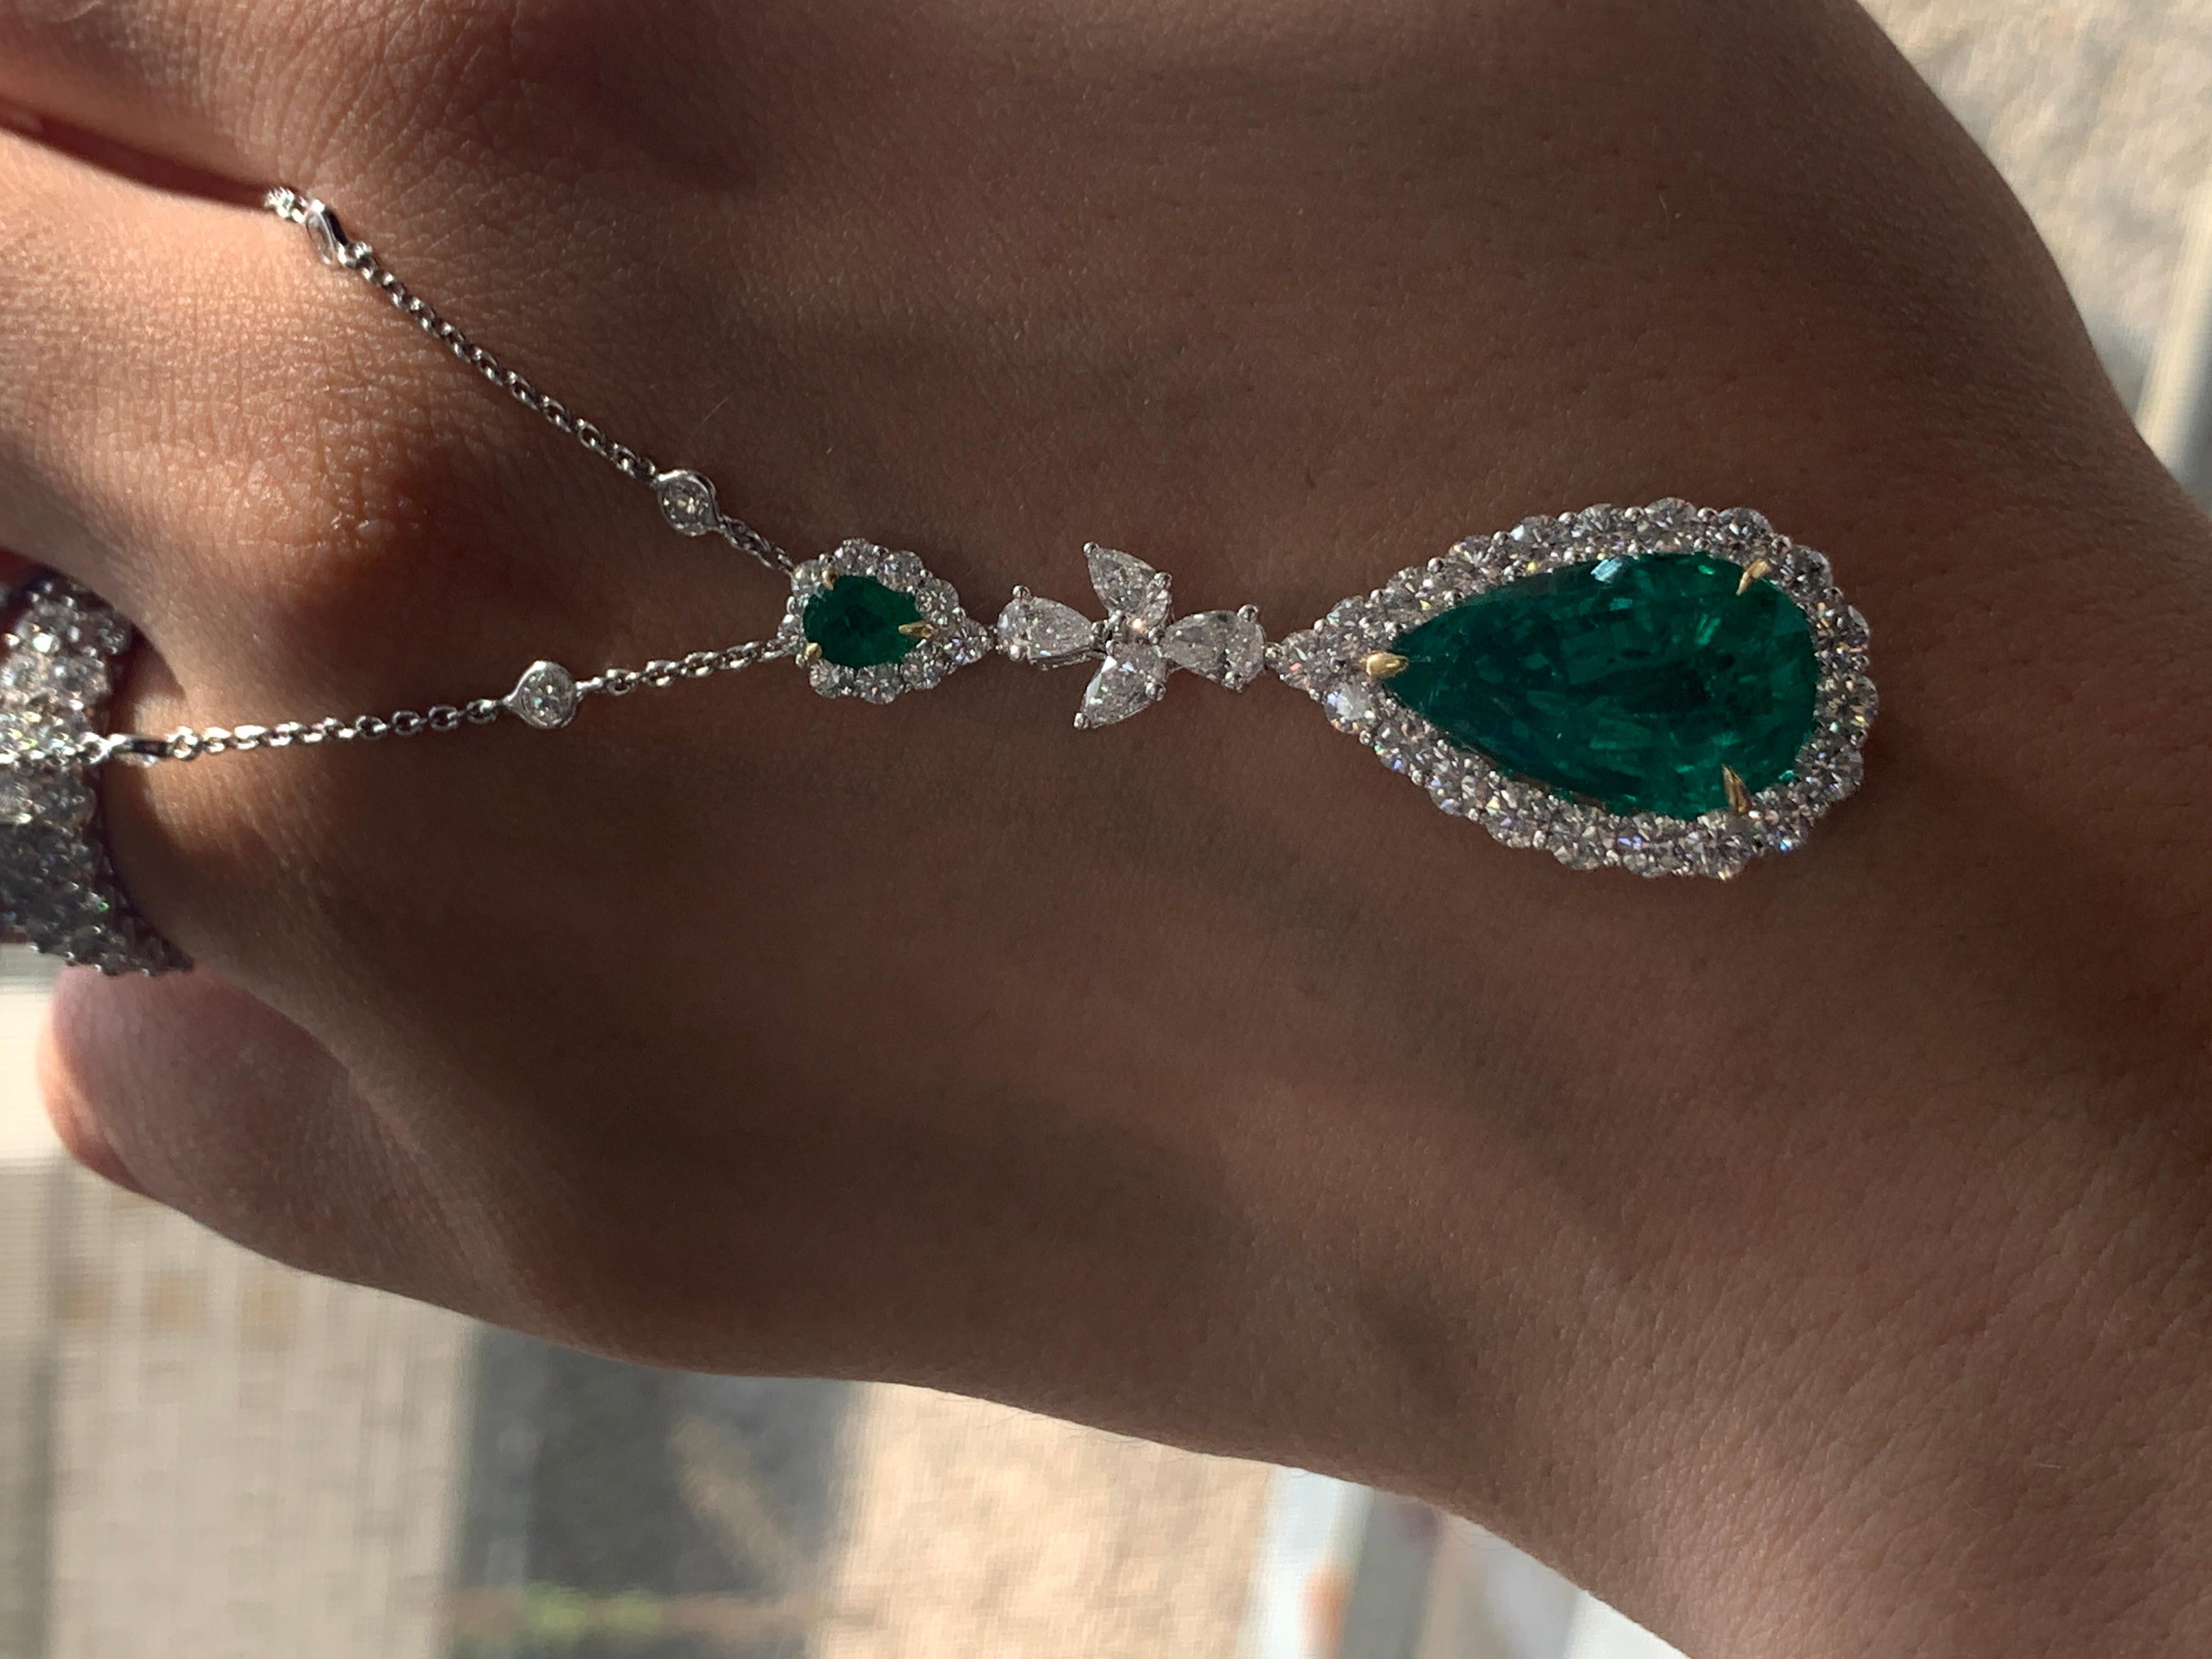 Elegant Pear Shape Green Emerald and Diamond Pendant

The center stone is 11.40 Carats Zambian Pear Shaped Emerald, certified by Swiss Lab.

Surrounded by 7.80 Carats of round brilliant cut diamonds, around and  on diamond by the yard necklace

